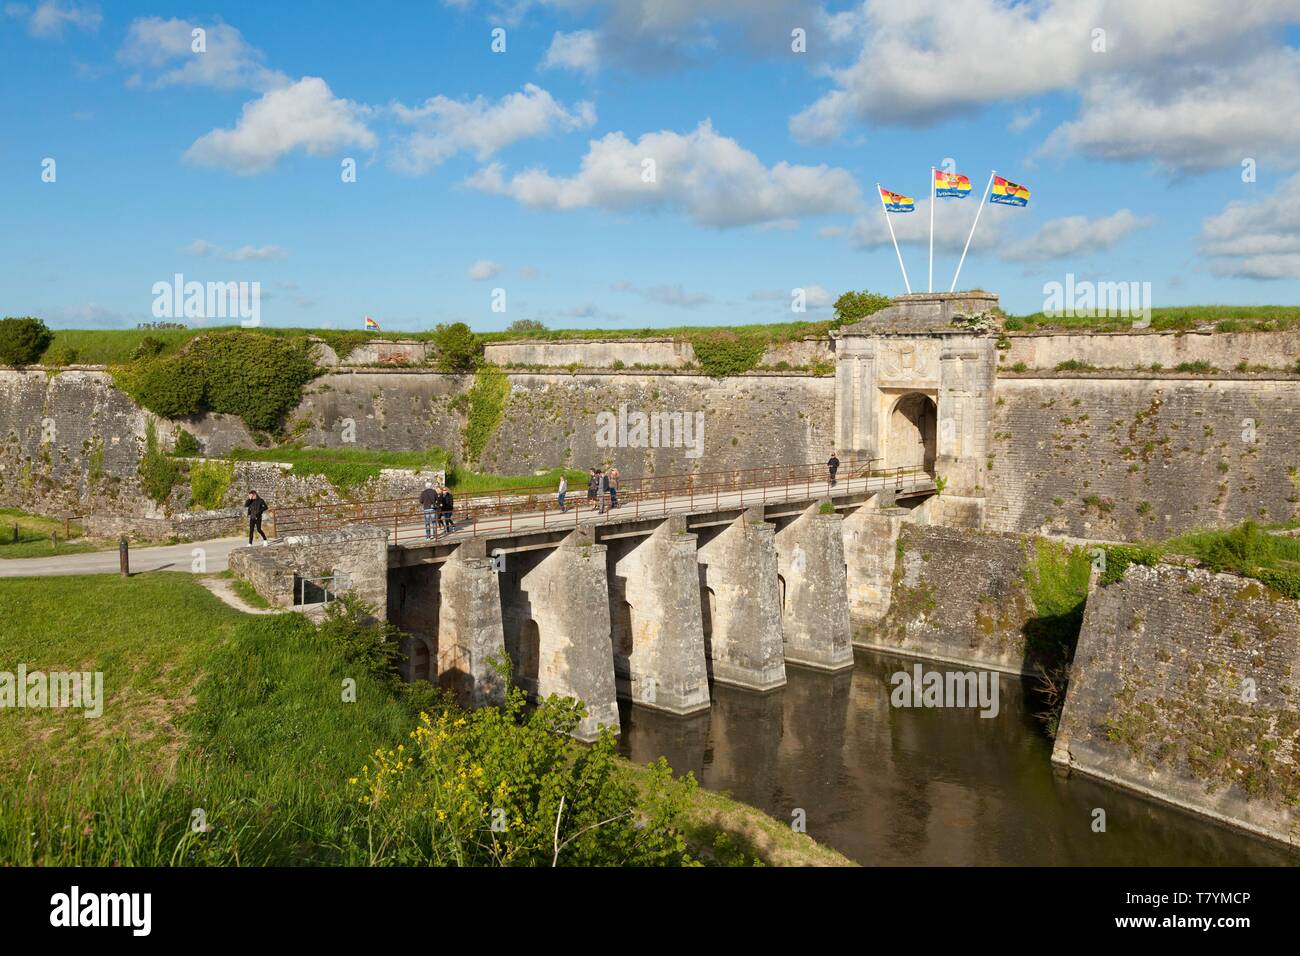 France, Charente Maritime, Oleron isle, Chateau d'Oleron, the Citadel, a military structure built between 1630 and 1704, royal door Stock Photo